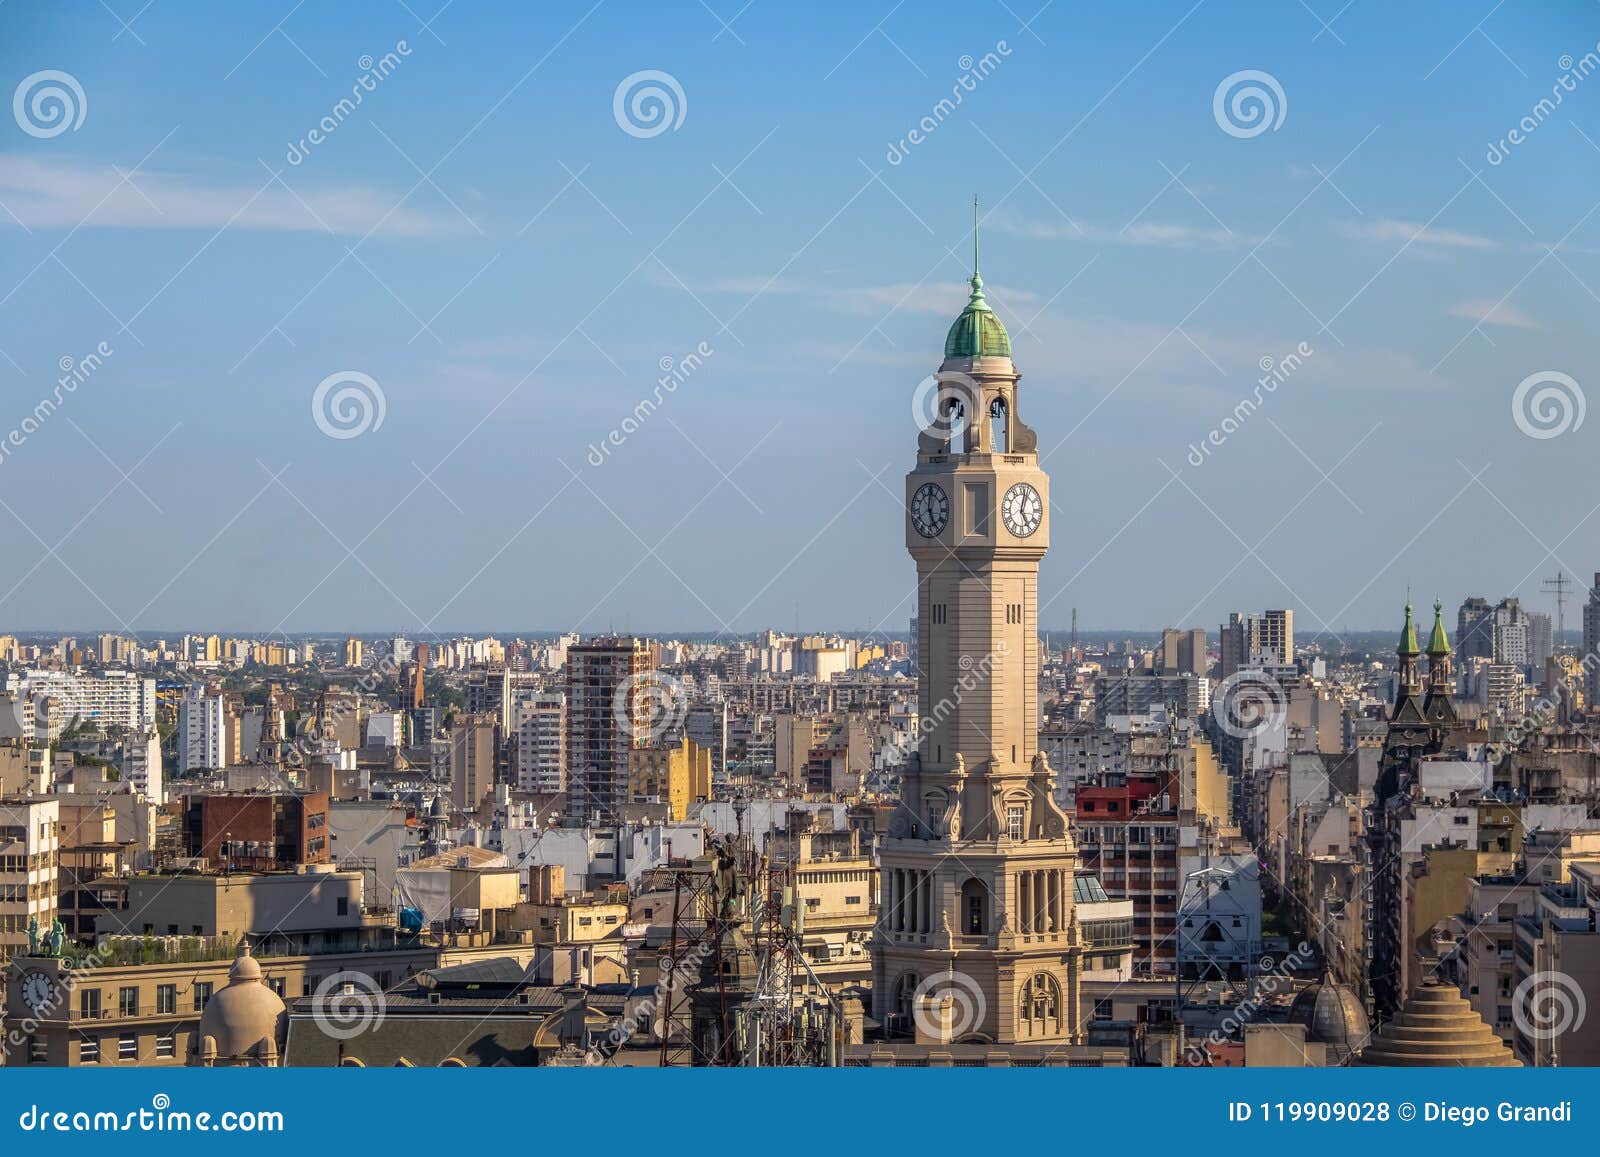 buenos aires city legislature tower and downtown aerial view - buenos aires, argentina